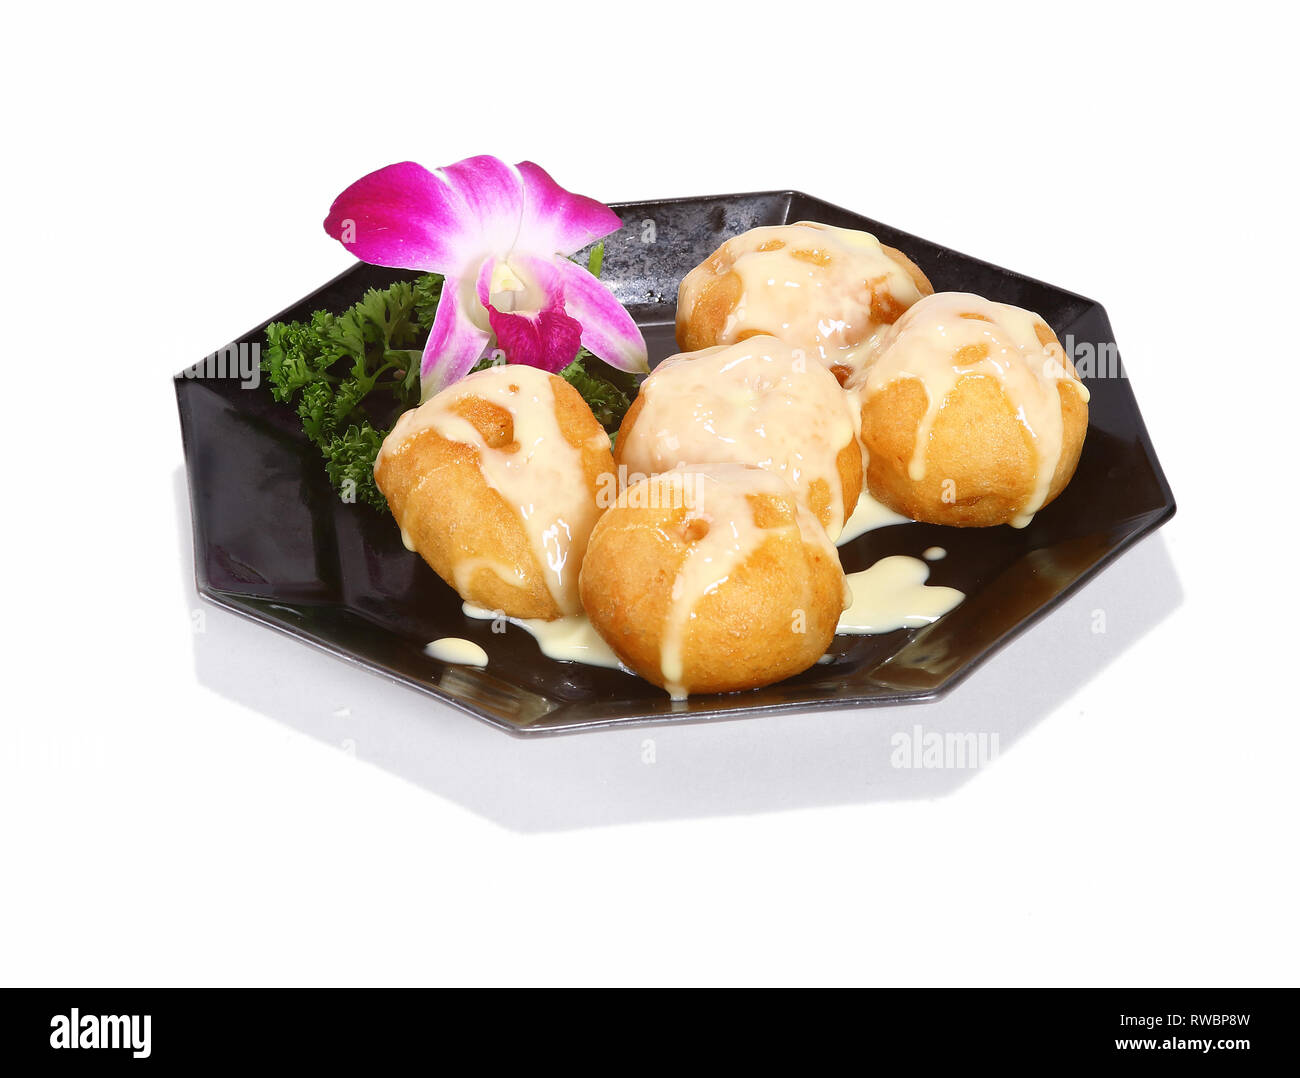 Chinese / Asian desserts served on a black plate. Stock Photo